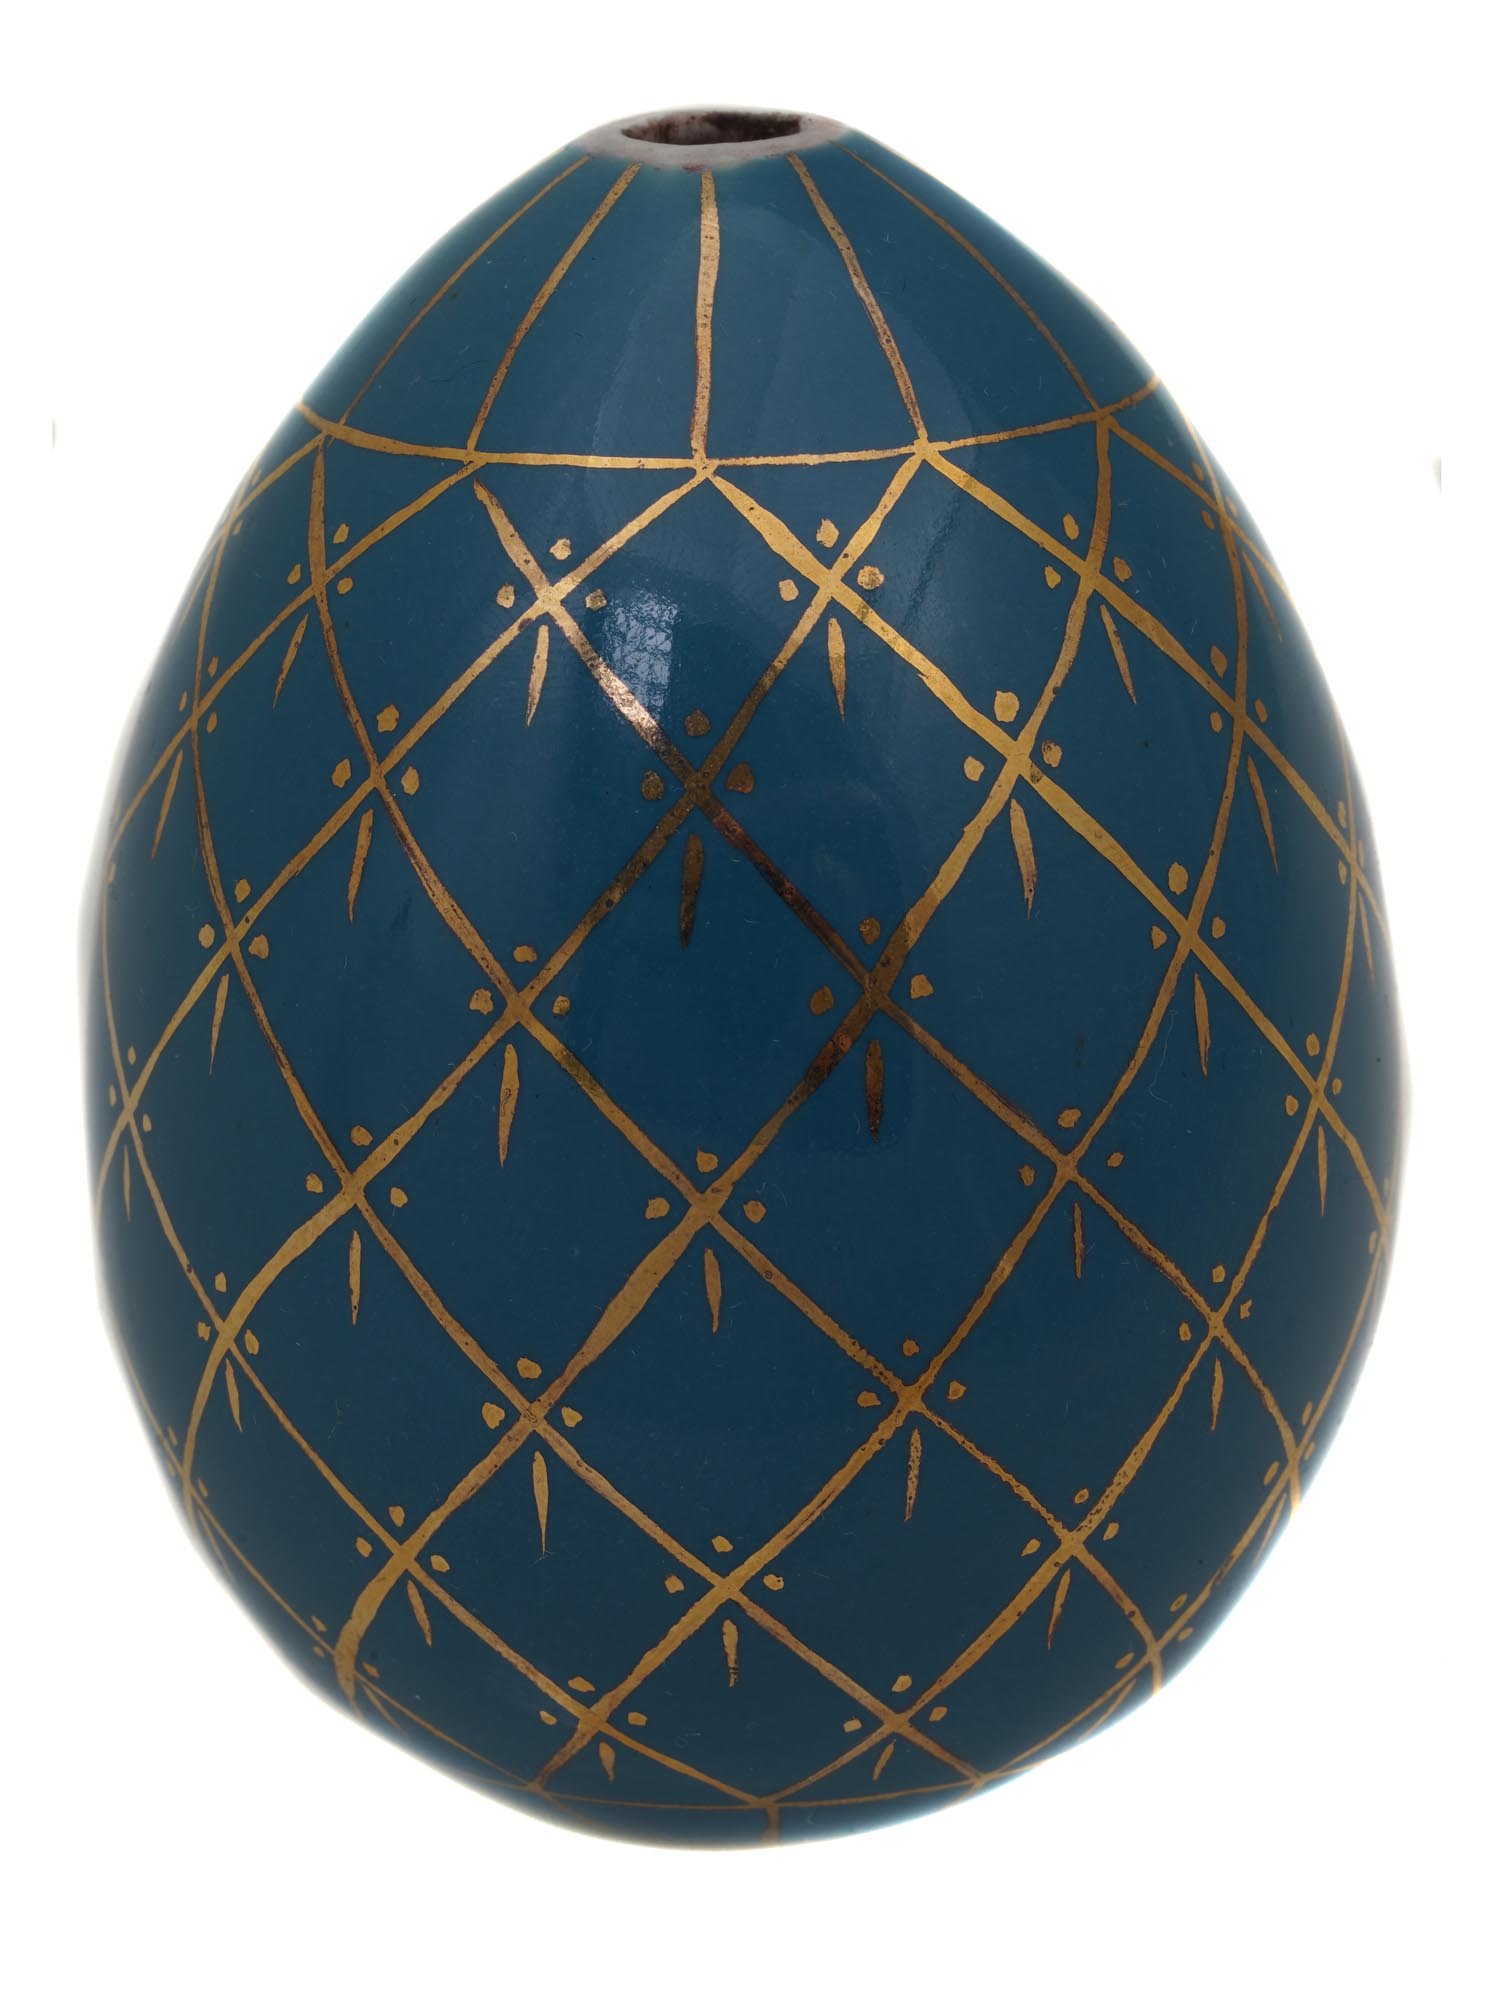 A RUSSIAN PORCELAIN EASTER EGG IMPERIAL CROWN PIC-1